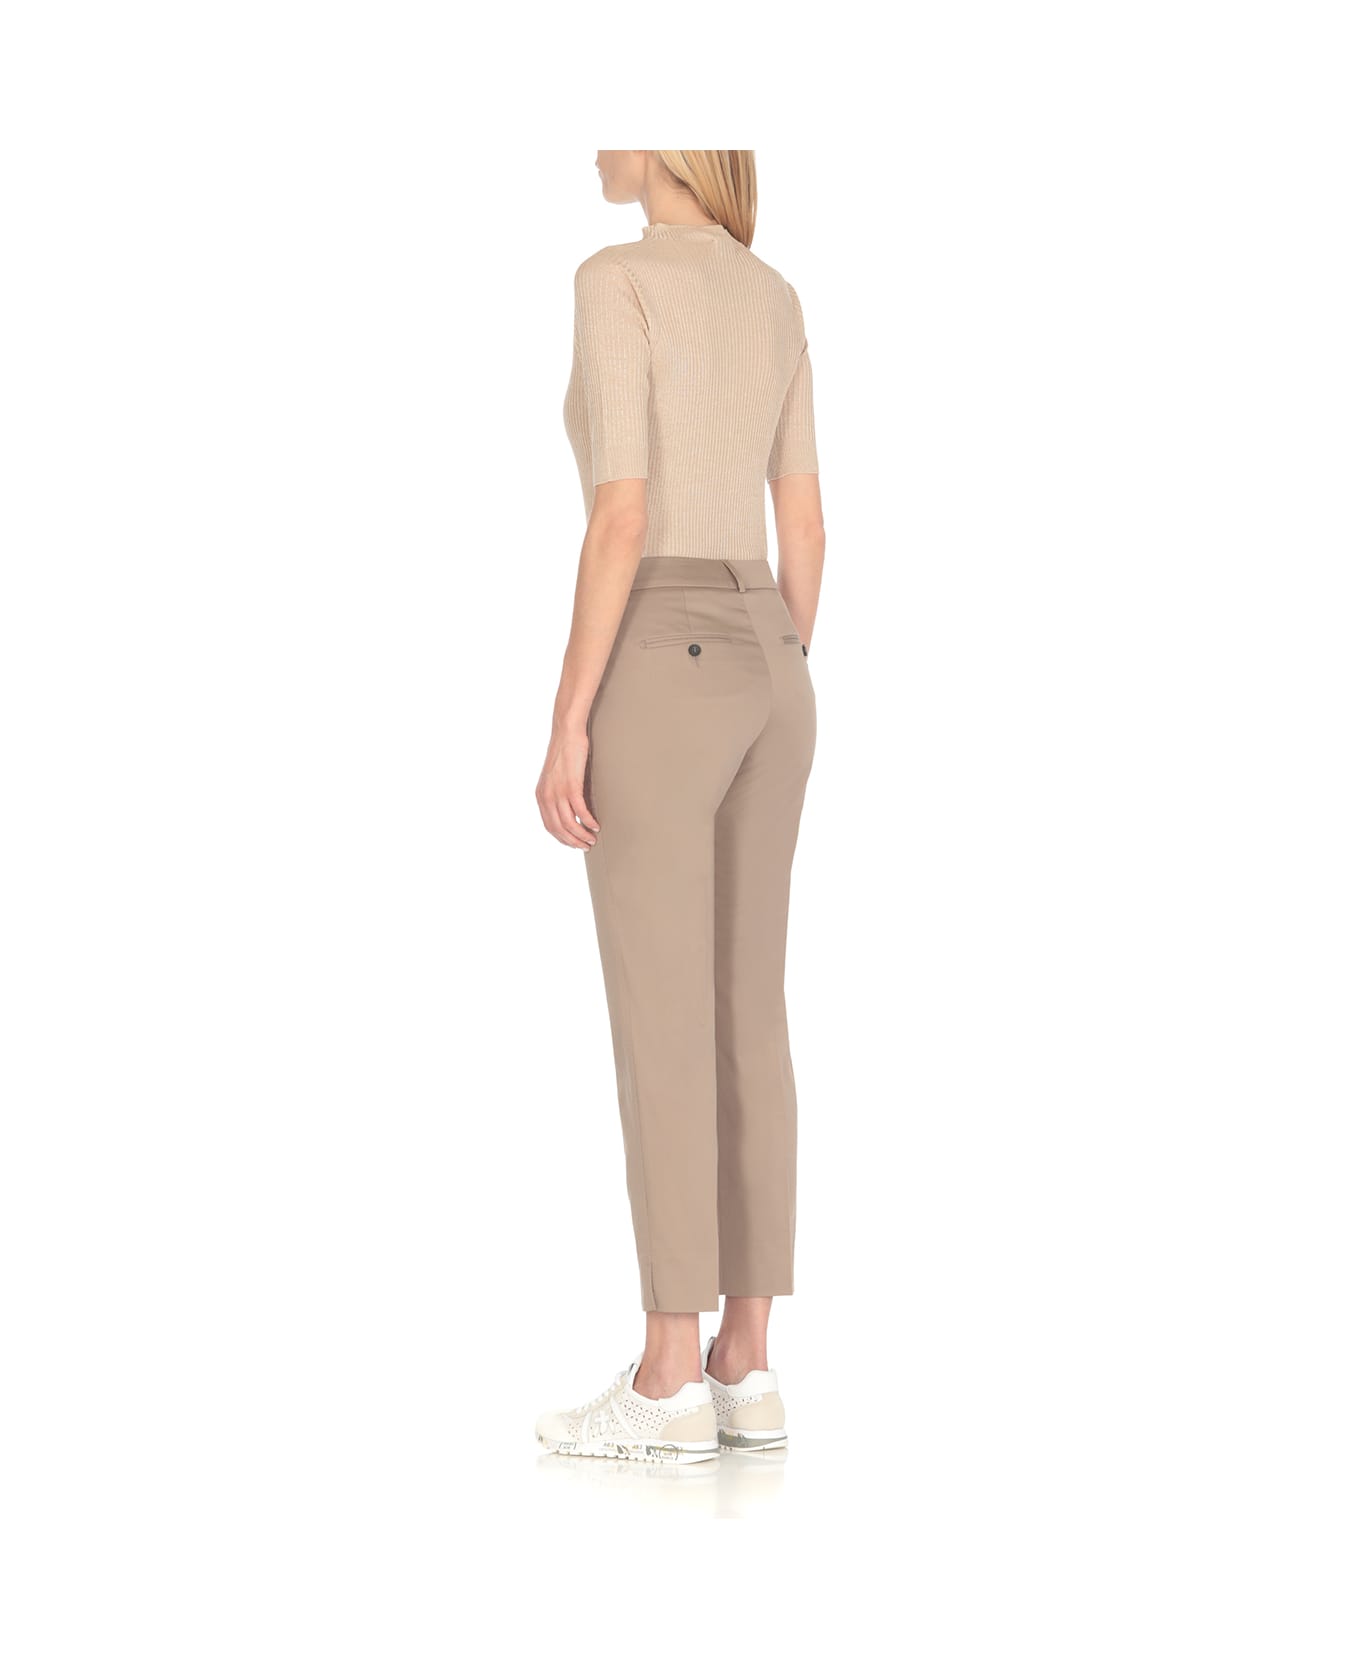 Peserico Cotton Trousers - Beige